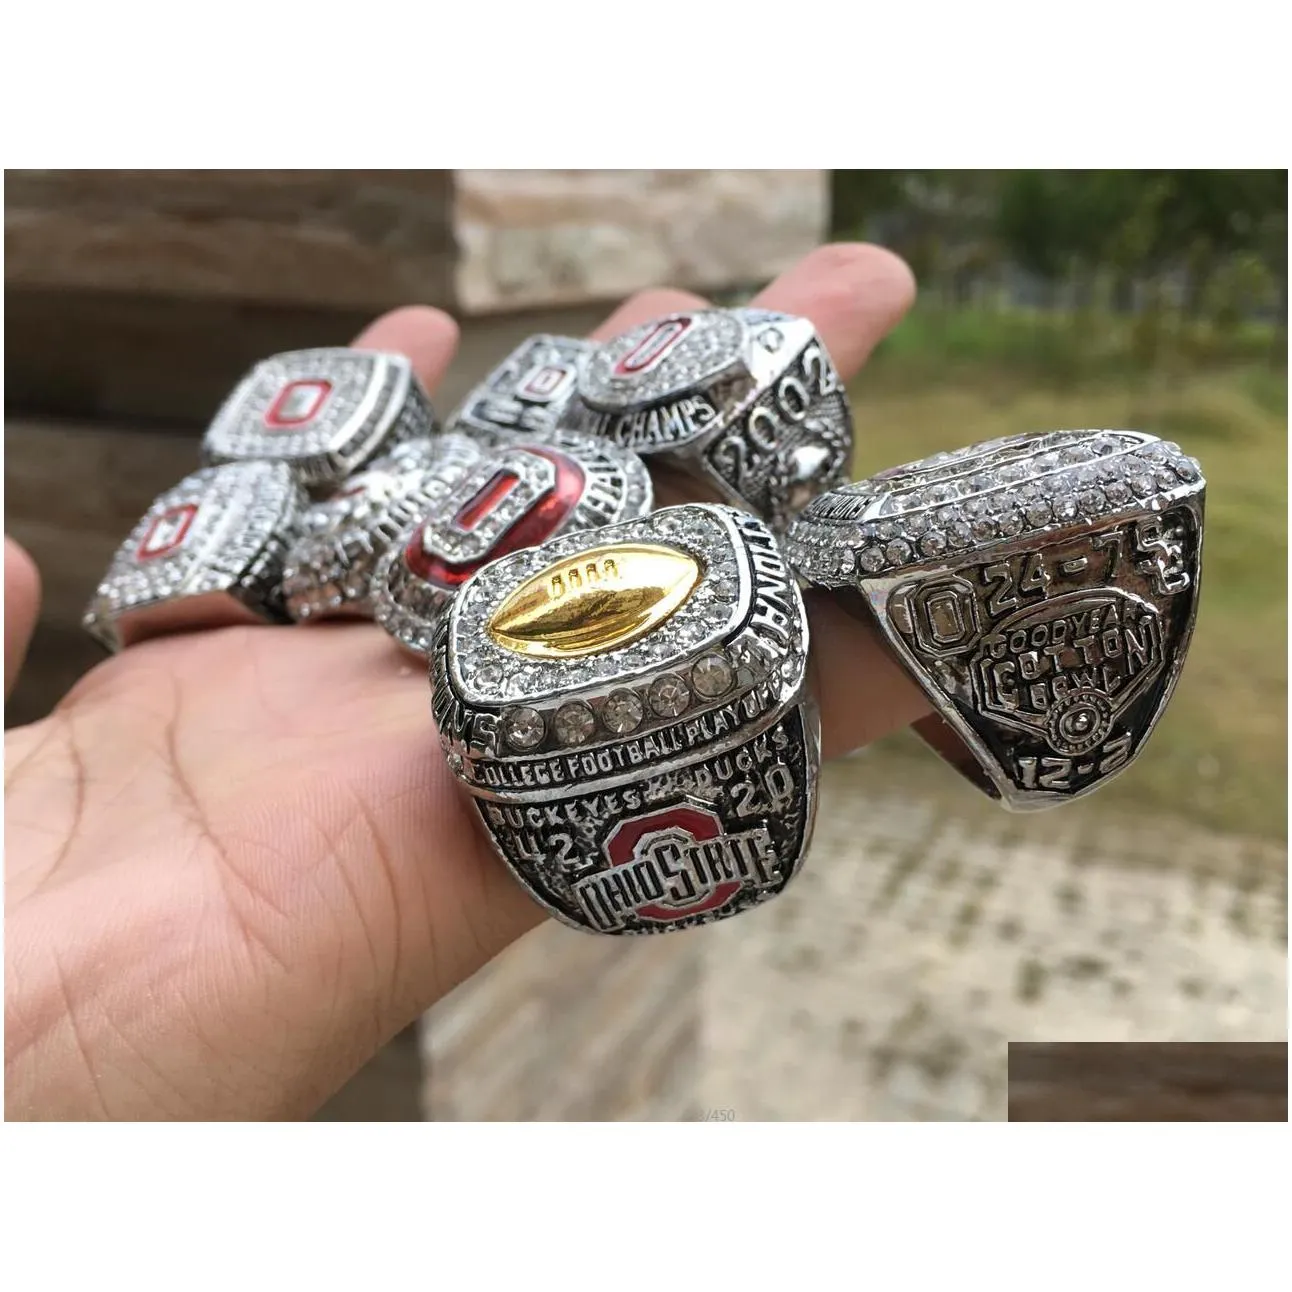 Cluster Rings 17Pcs Ohio State Buckeyes National Champion Championship Ring Set Solid Men Fan Brithday Gift Wholesale Drop Drop Delive Dh1Ga